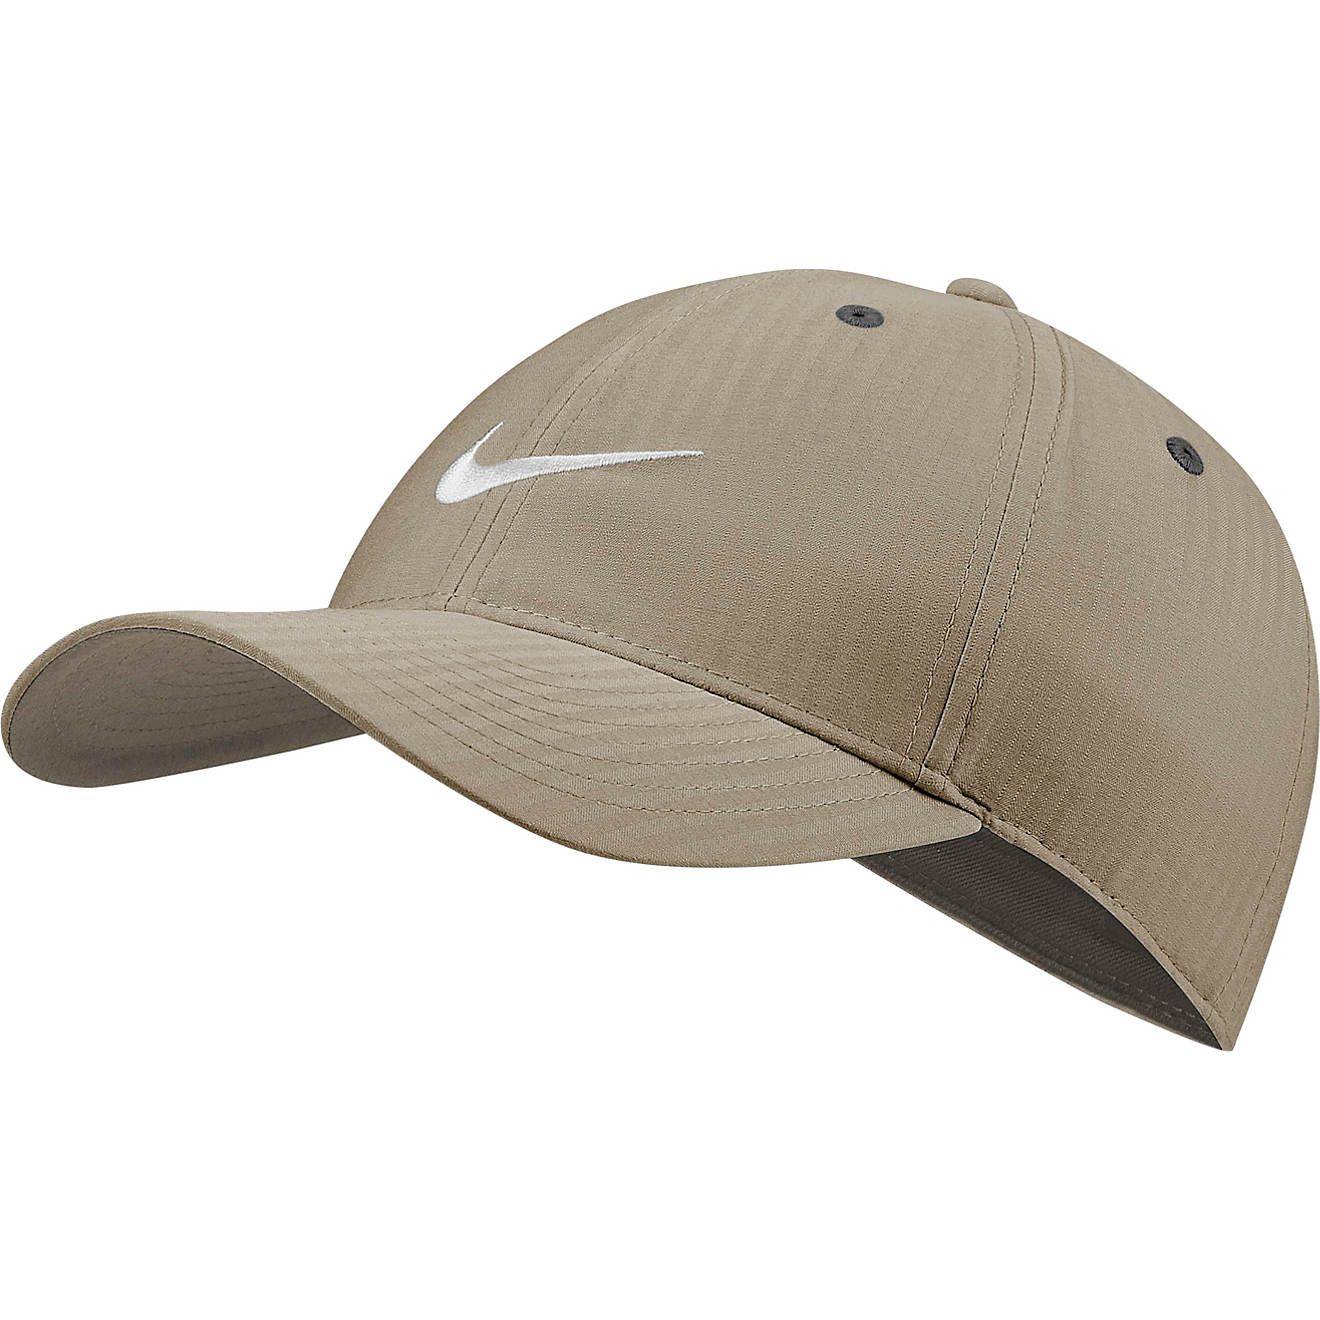 Nike Men's Legacy91 Golf Hat | Academy | Academy Sports + Outdoors